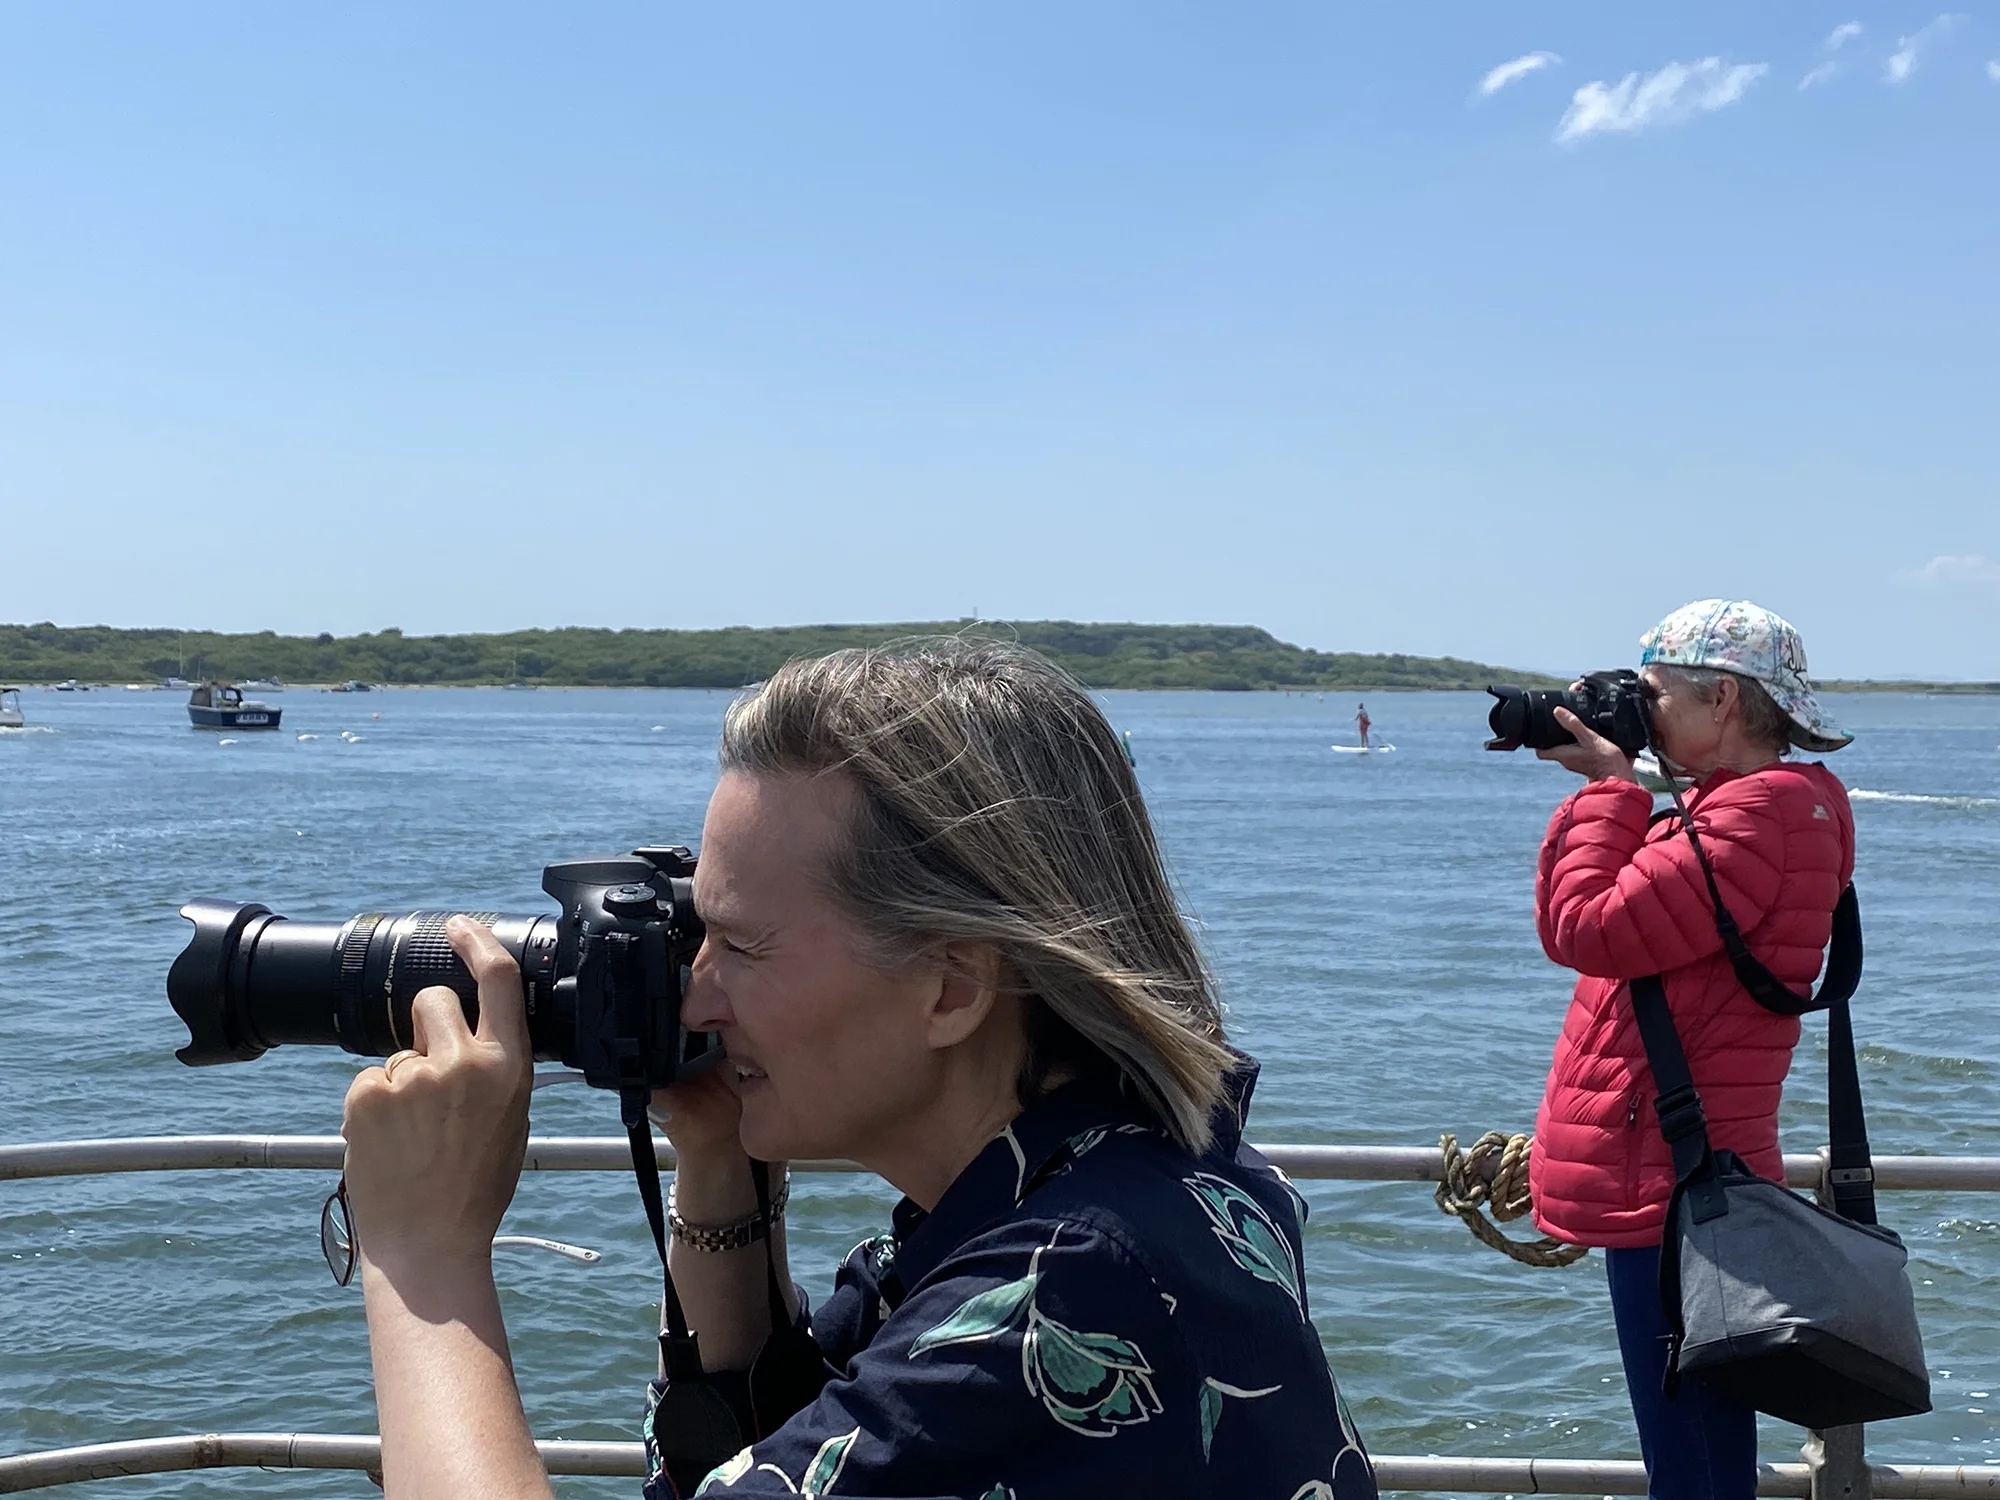 Two female photographers with cameras raised standing by the water at Christchurch harbour UK